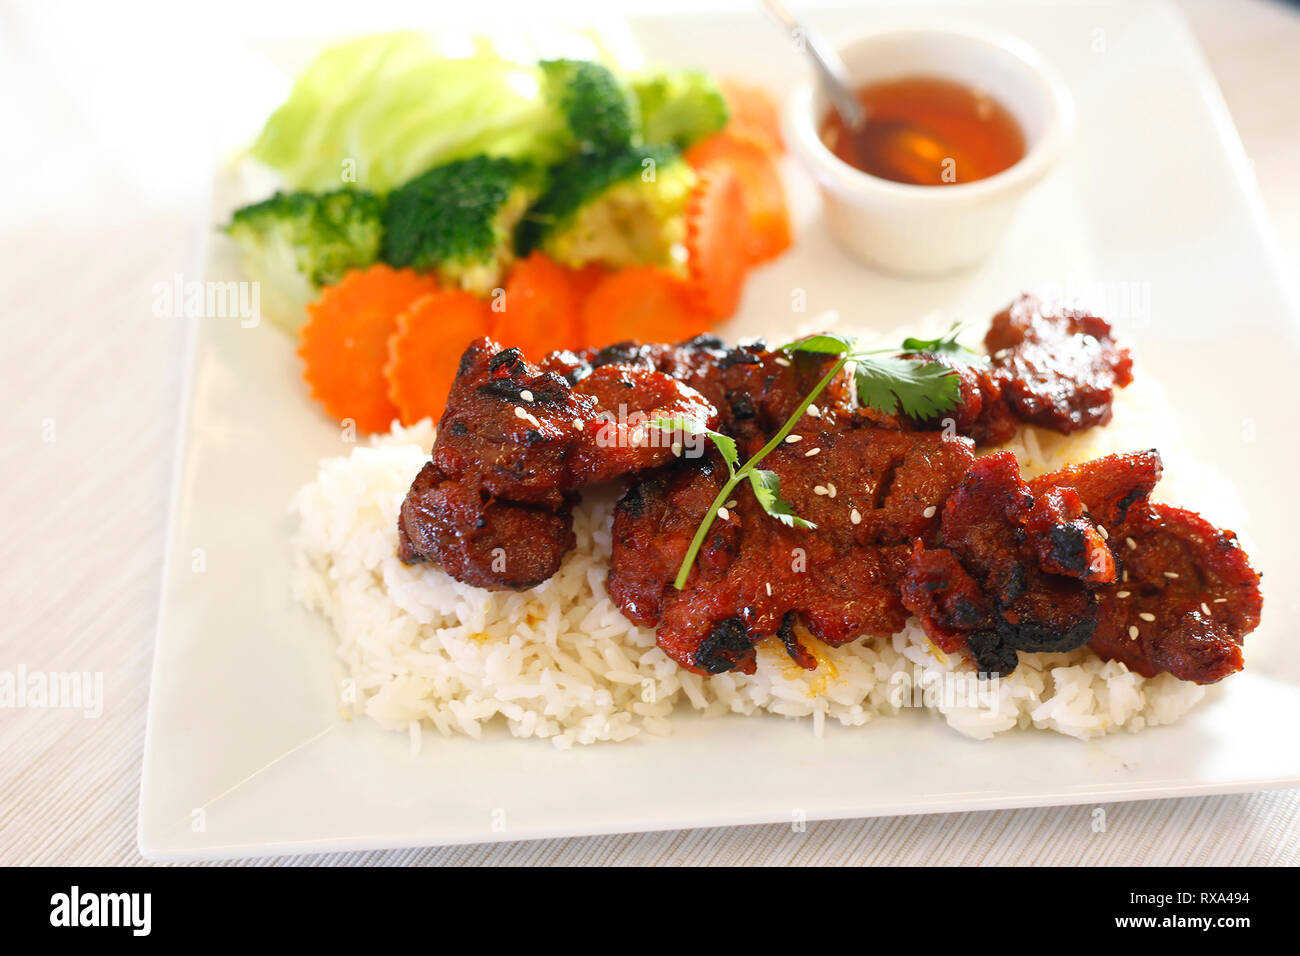 High angle view of rice with meat and salad served in plate on table Stock Photo